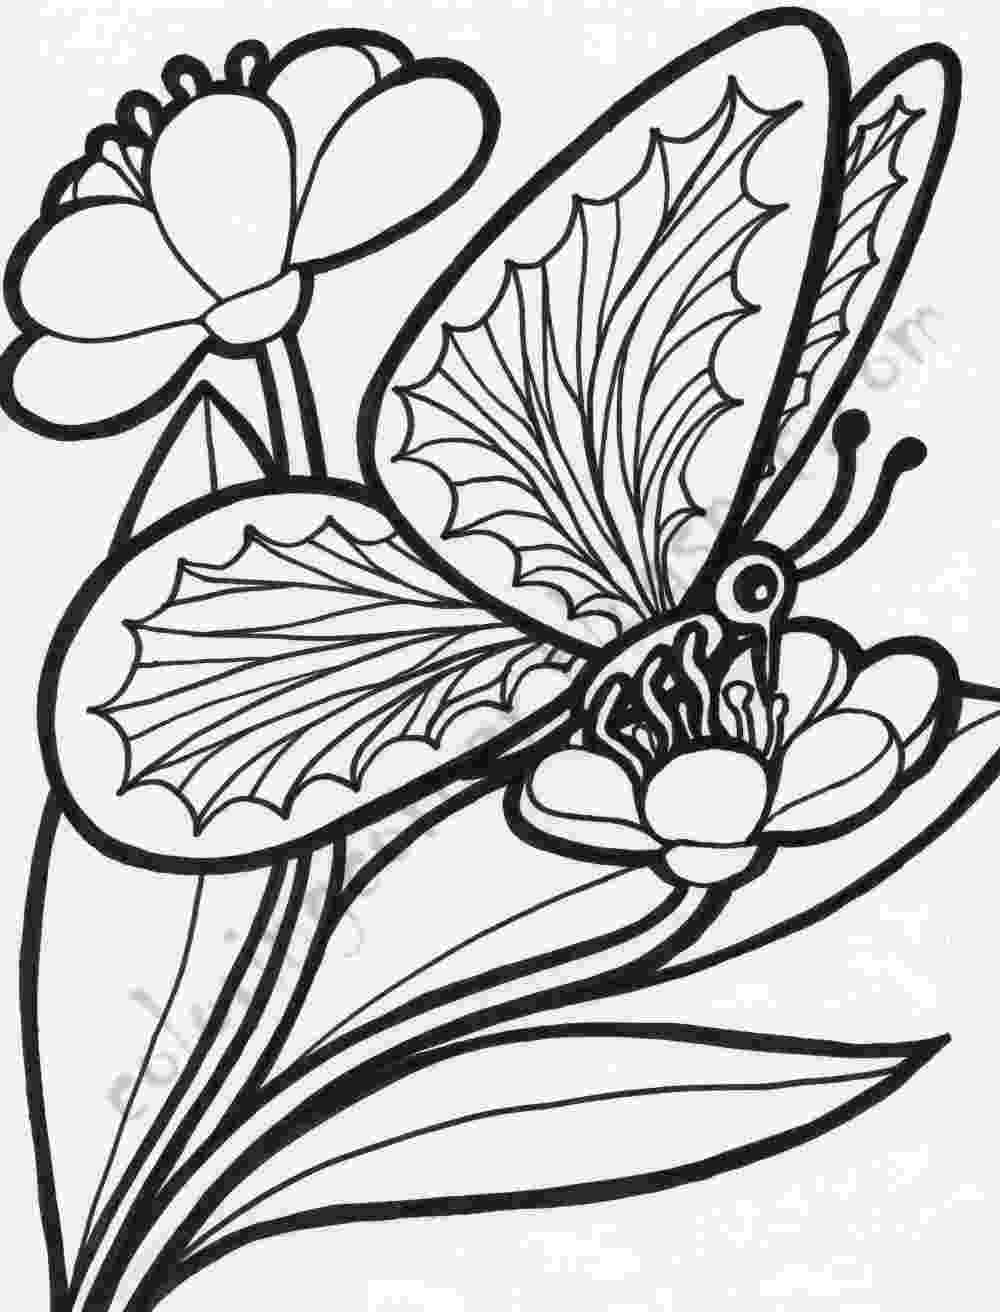 butterfly coloring pages free printable free printable butterfly coloring pages for kids free pages coloring butterfly printable 